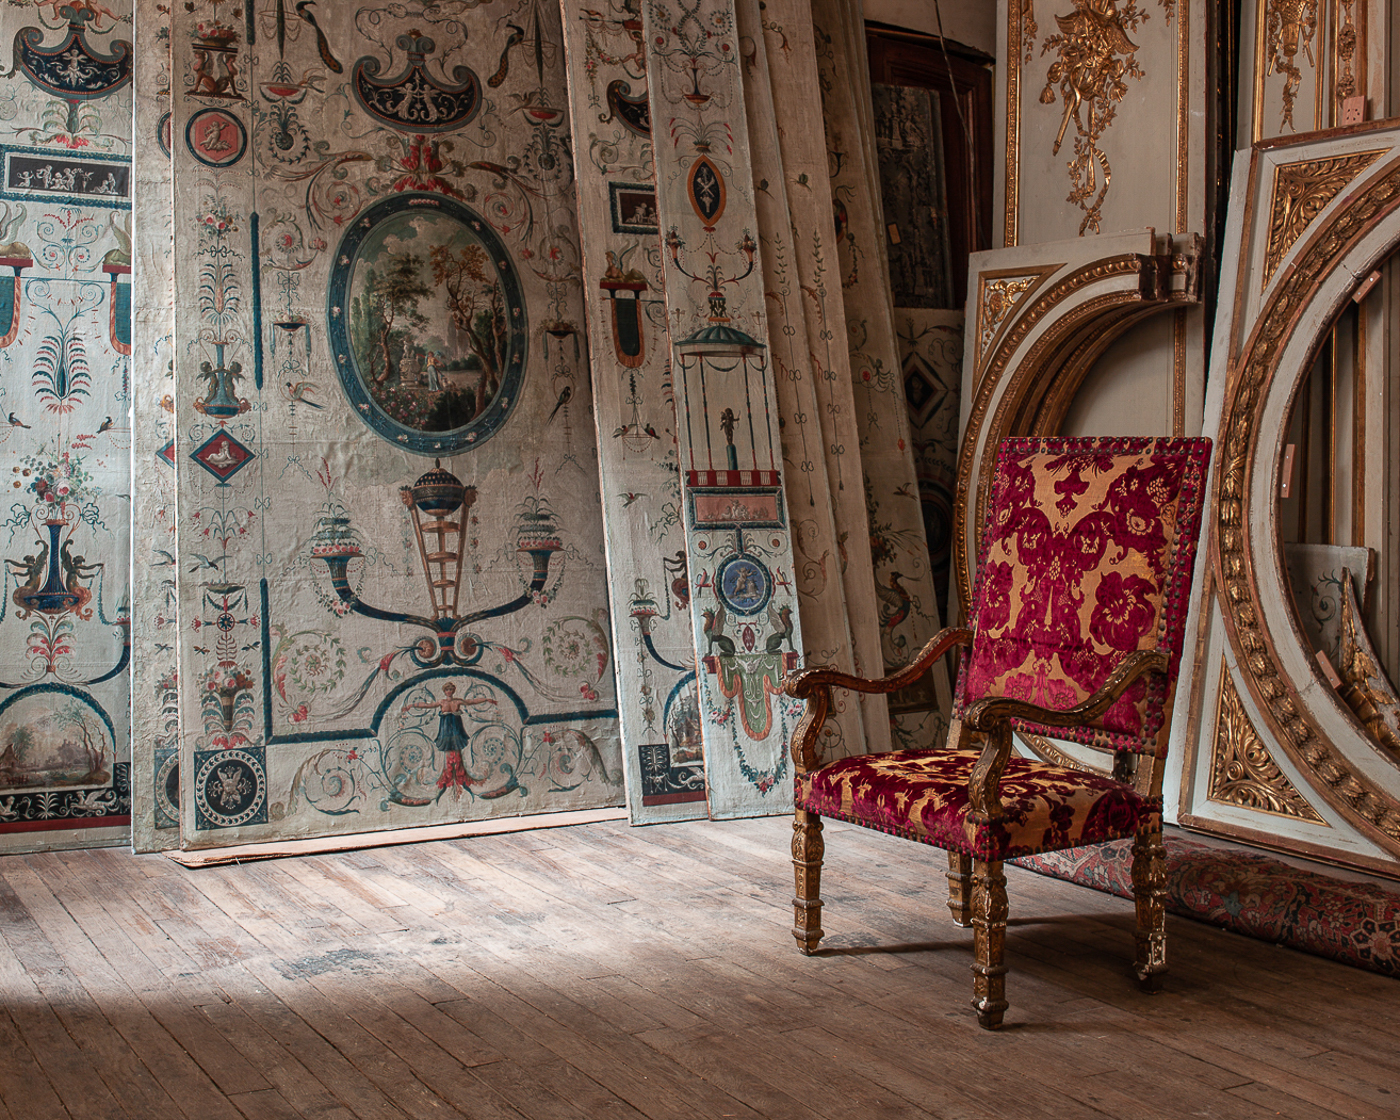 An ornate antique armchair sits in a room filled with painted decors